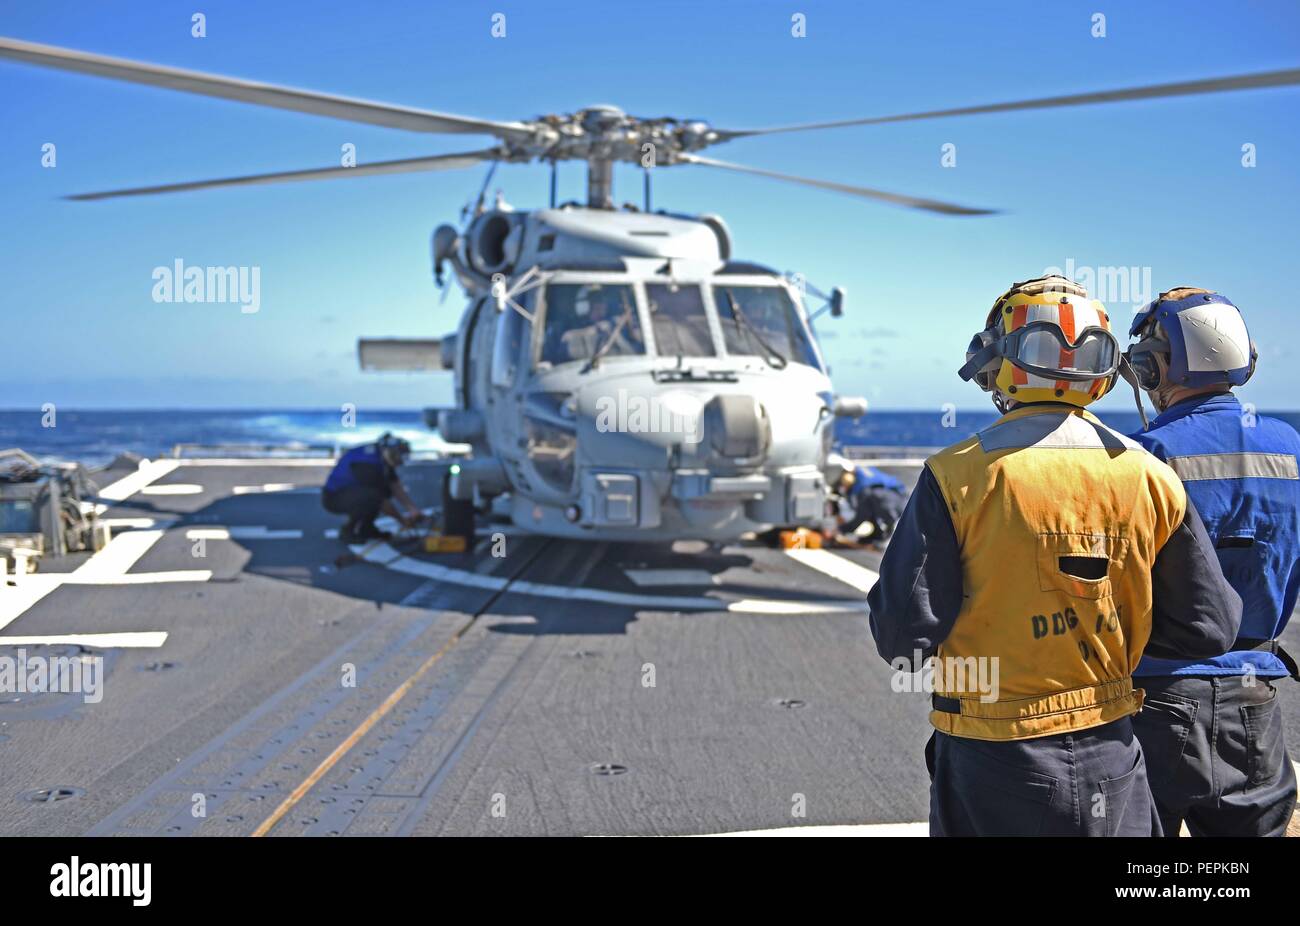 160123-N-KM939-198 PACIFIC OCEAN (Jan 23, 2016) - Sailors monitor the removal of chocks and chains from an MH-60R Sea Hawk helicopter during flight operations on the guided-missile destroyer, USS Stockdale (DDG-106). Providing a combat-ready force to protect collective maritime interests, Stockdale, assigned to the Stennis strike group, is operating as part of the Great Green Fleet on a regularly scheduled Western Pacific deployment. (U.S. Navy photo by Mass Communication Specialist 3rd Class David A. Cox/Released) Stock Photo